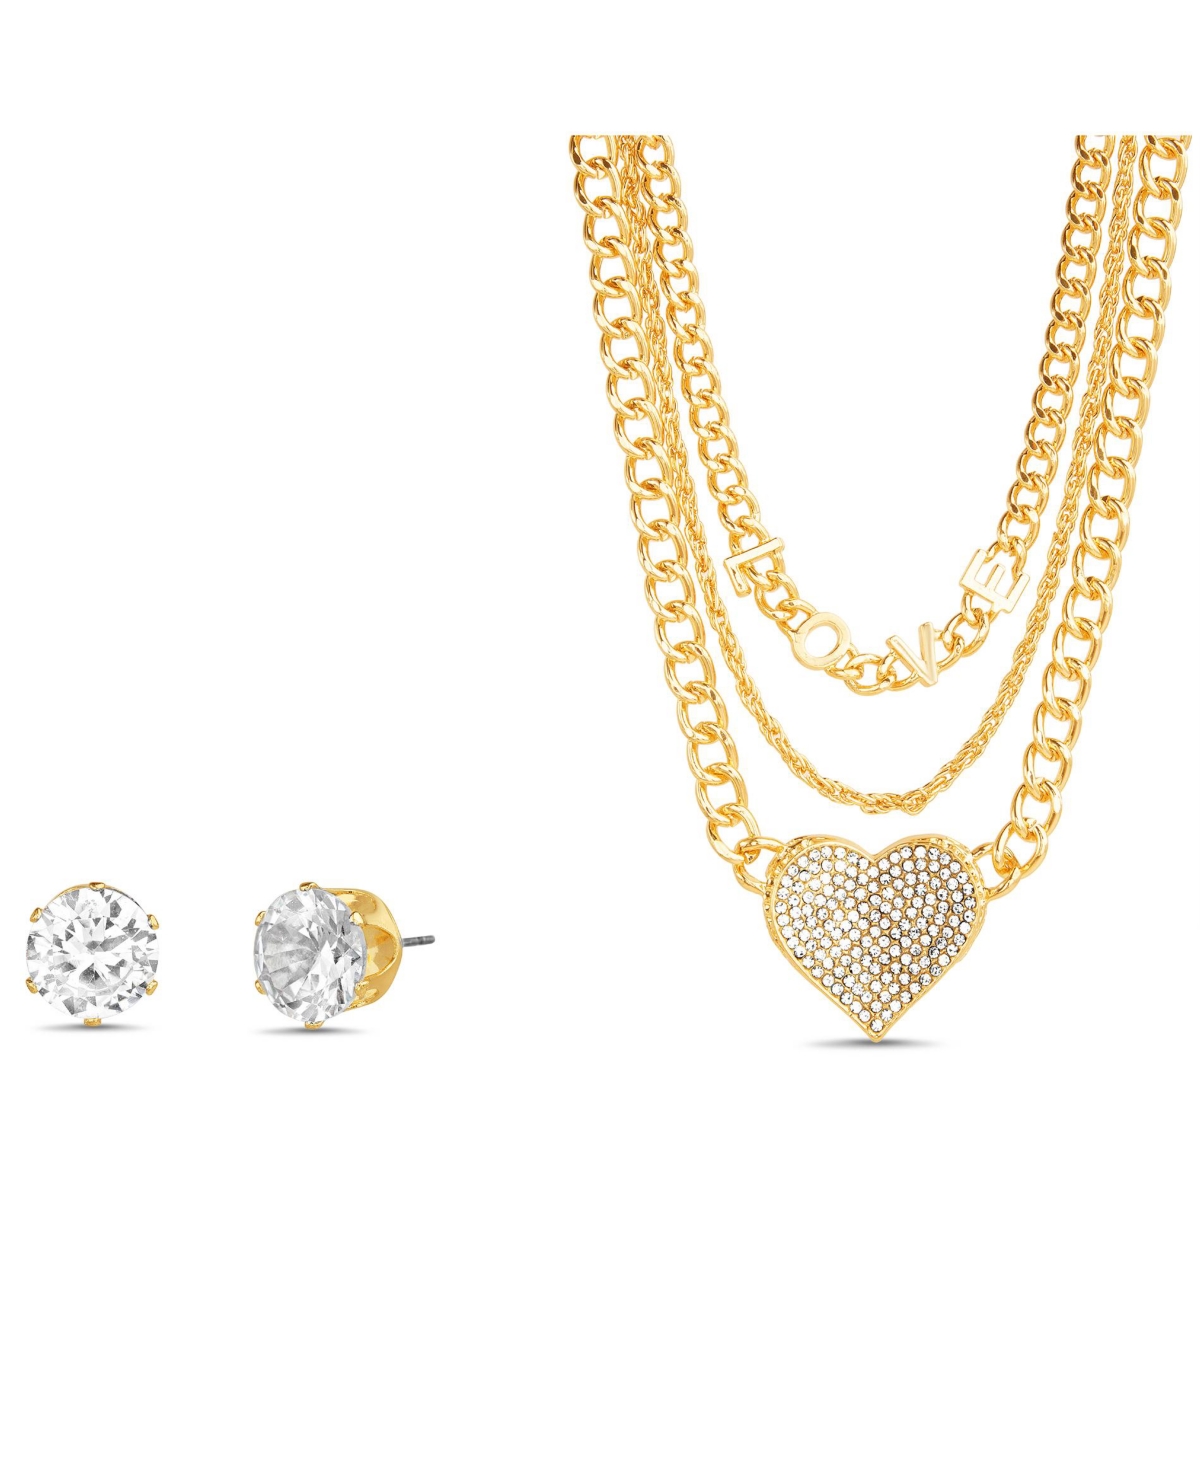 Gold-Tone 3-Row Necklace with Love Letter Charms and Heart Pendant with Round Cz Earrings Set - Gold